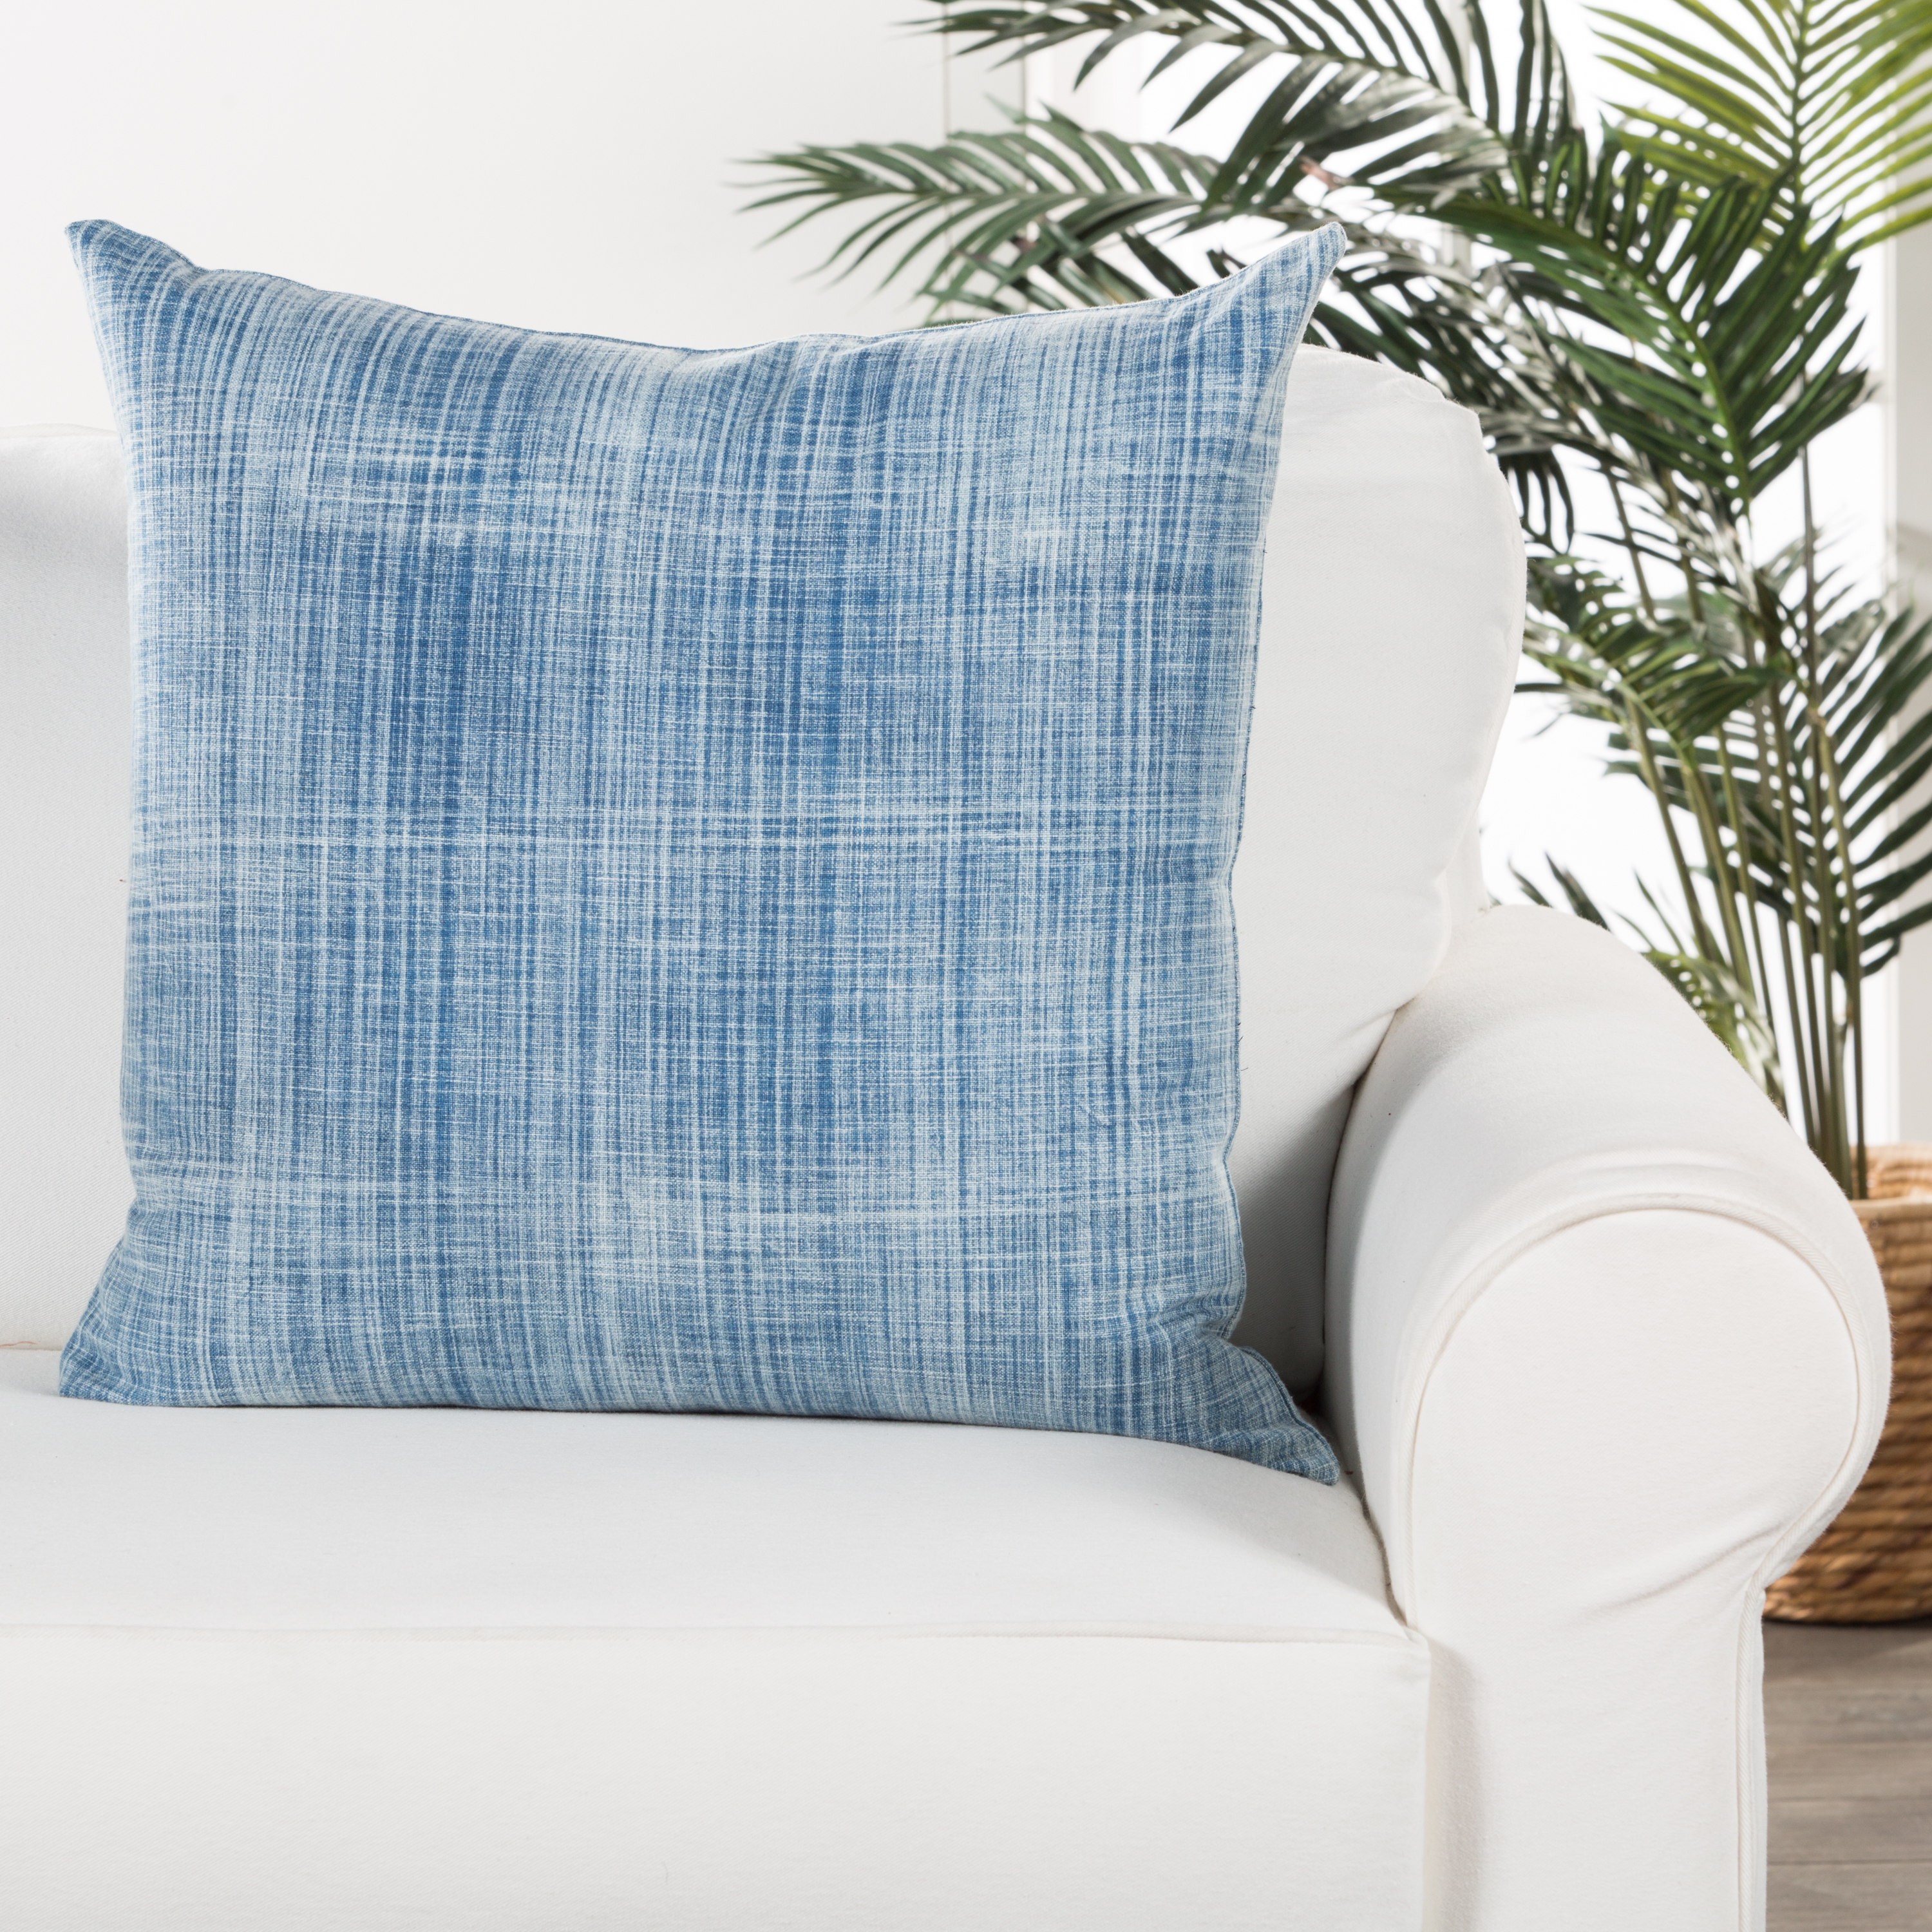 Revolve Pillow with Down Insert, Blue, 22" x 22" - Image 3